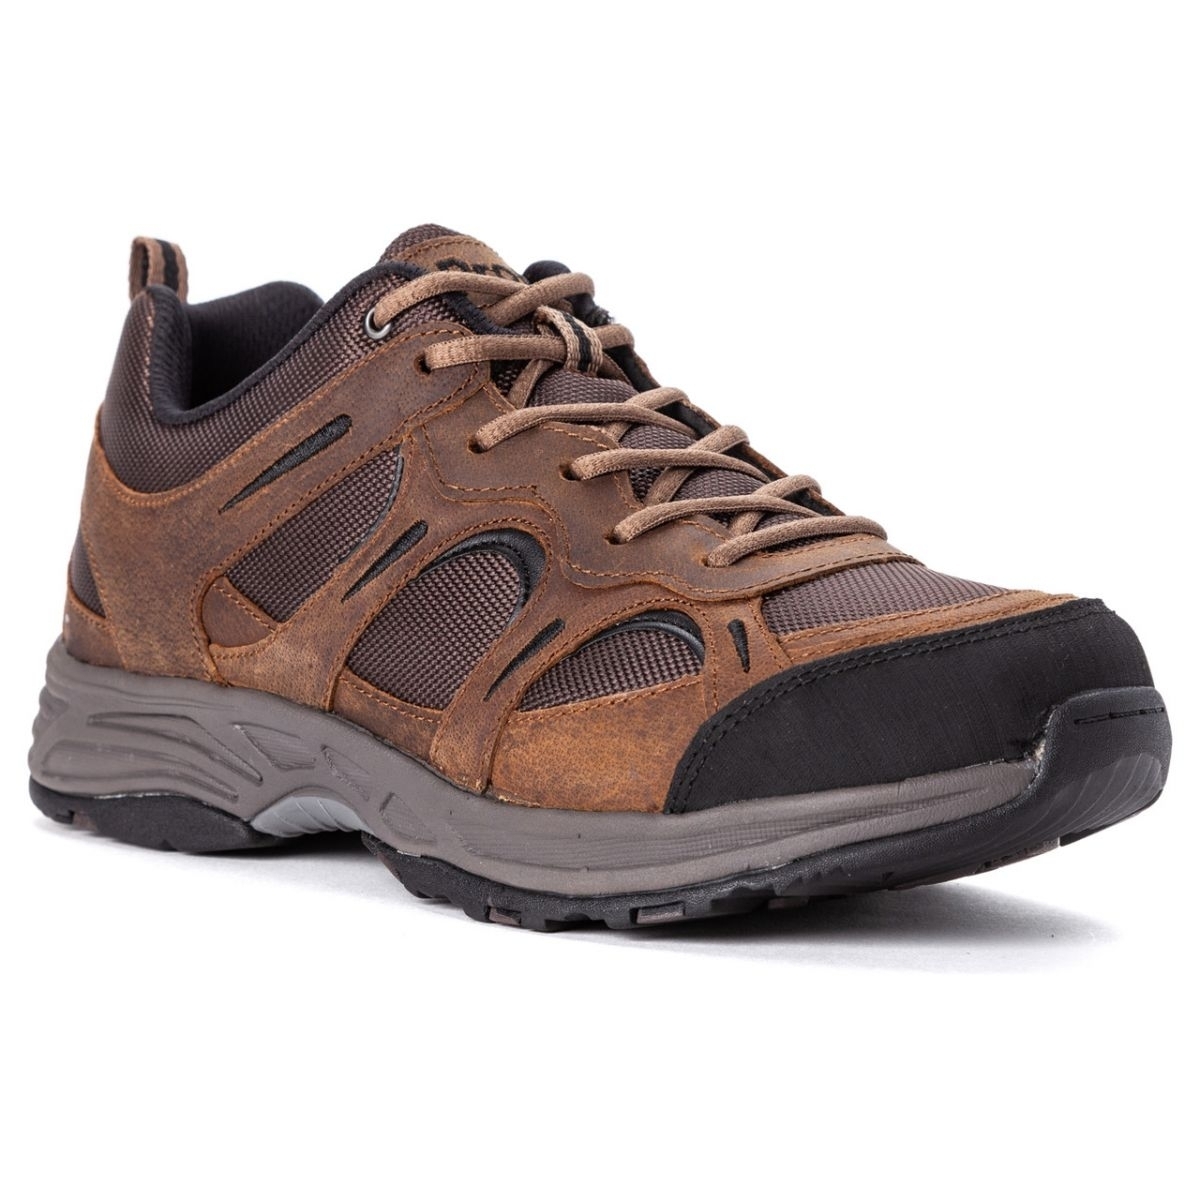 Propet Men's Connelly Hiking Shoe Brown - M5503BR BROWN - BROWN, 7